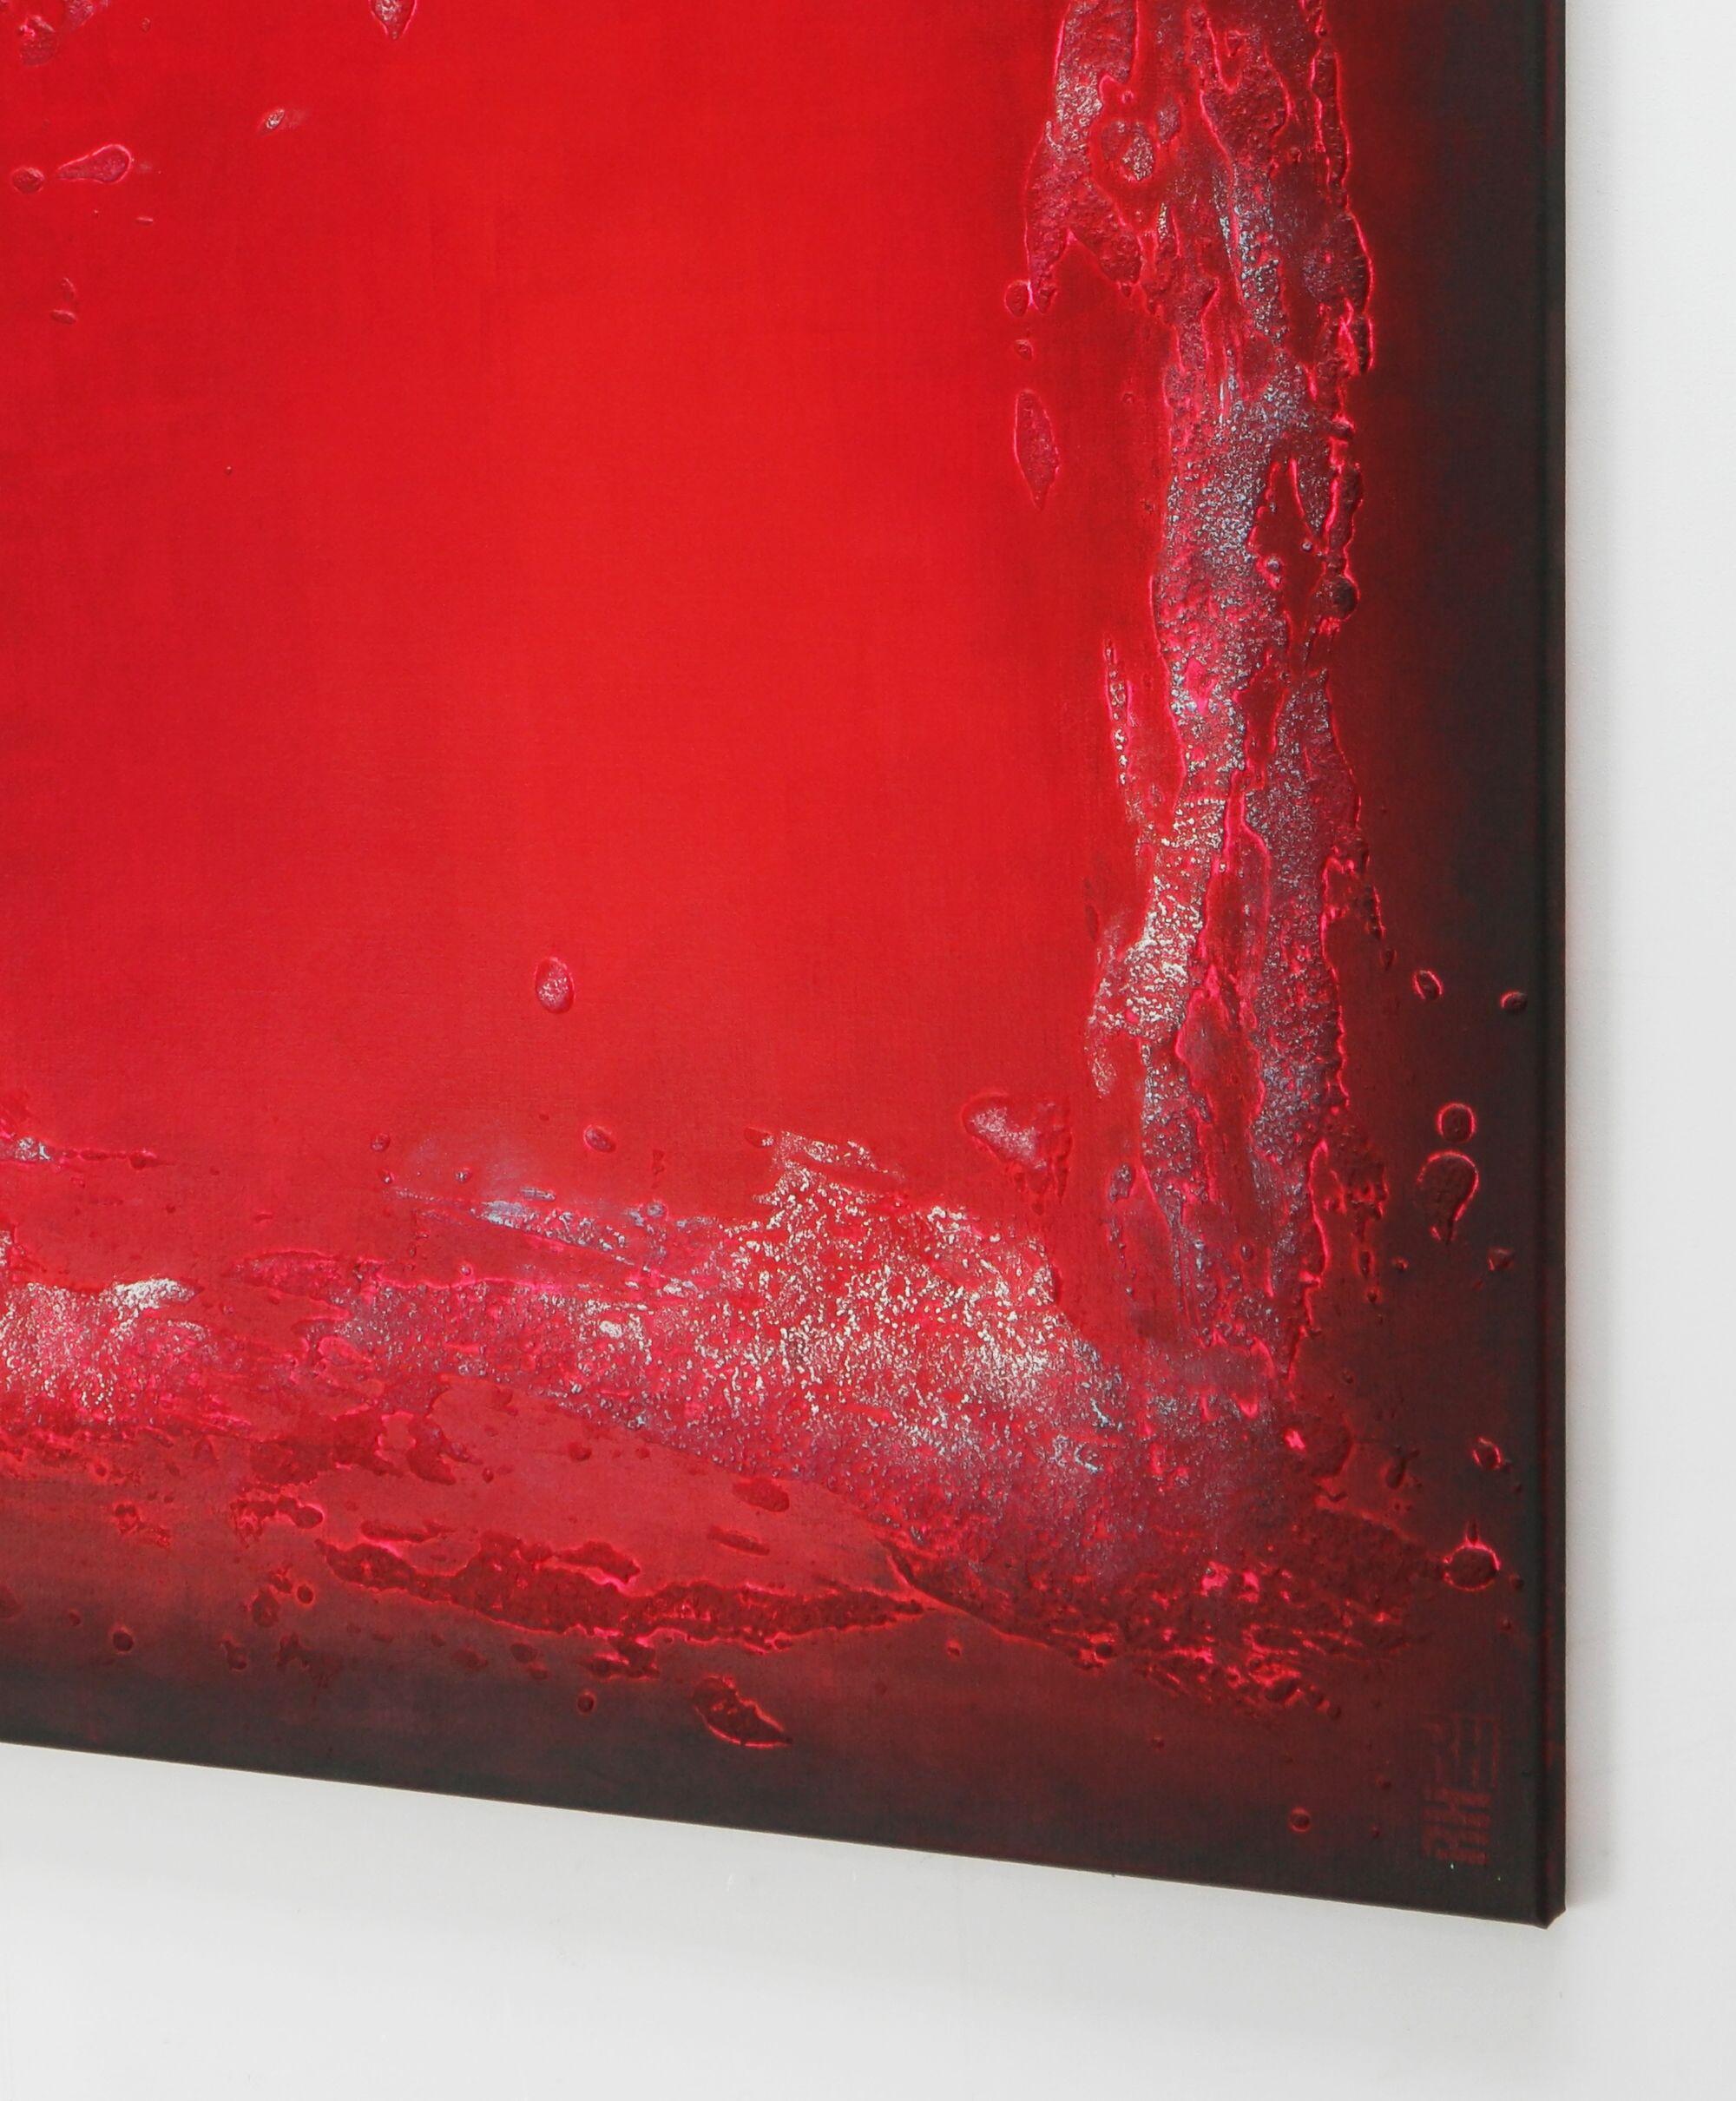 - For UK residence ; I will cover the import tax -  ---------------------------------------------------------------------------------------------------    Acrylic Abstract Painting, Original artwork created by Ronald Hunter.    A square red